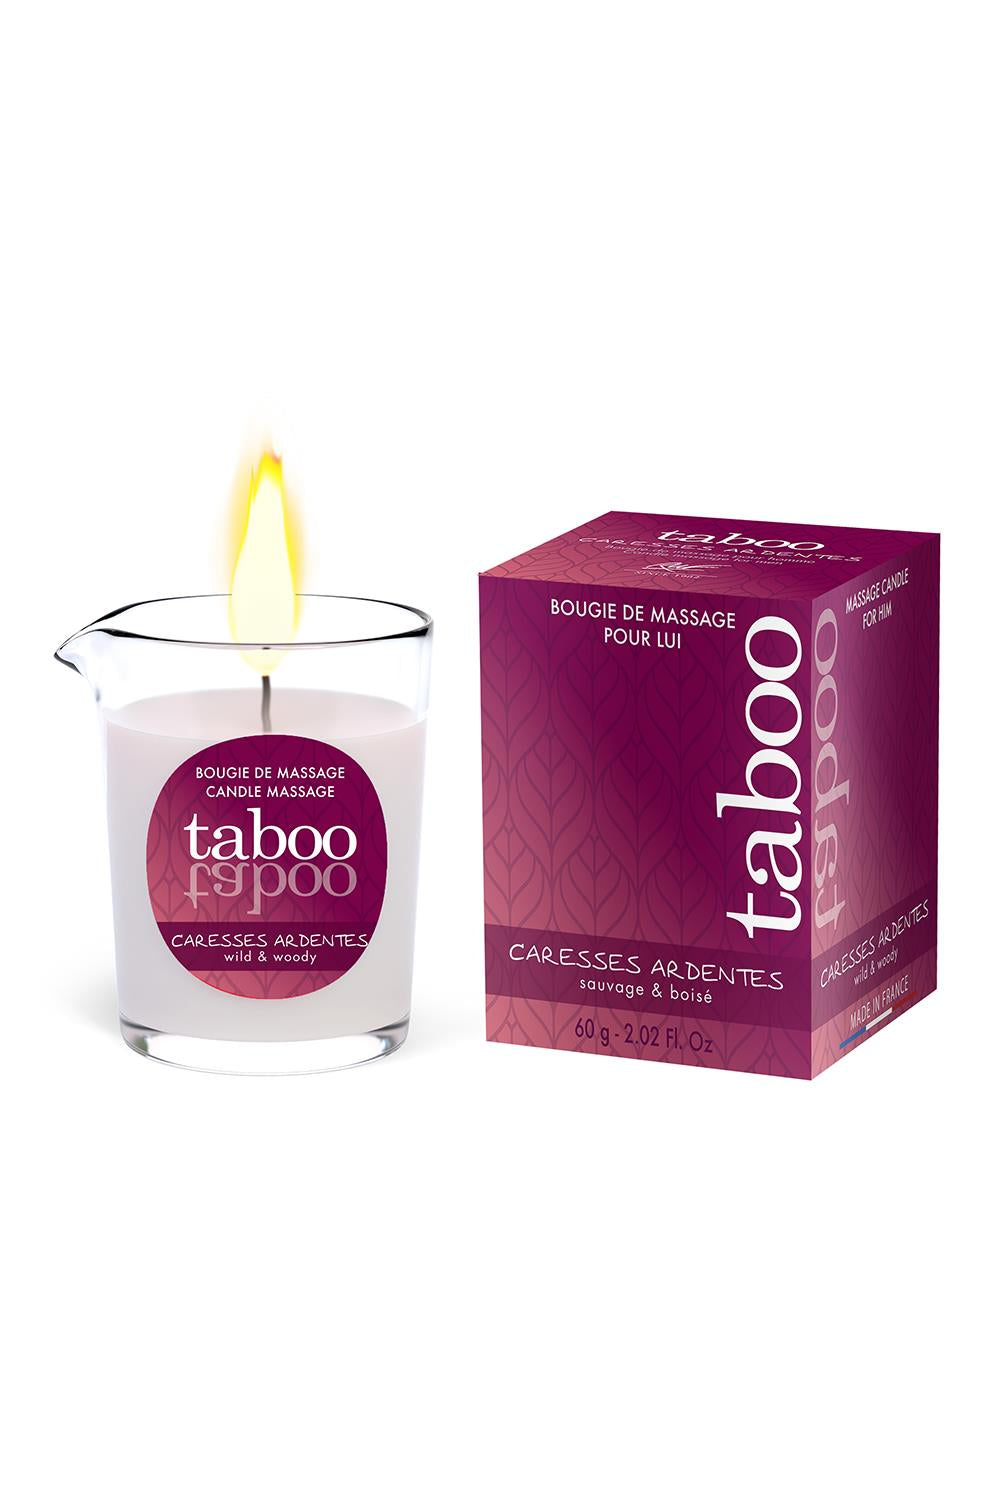 Taboo Caresses Ardentes For Men